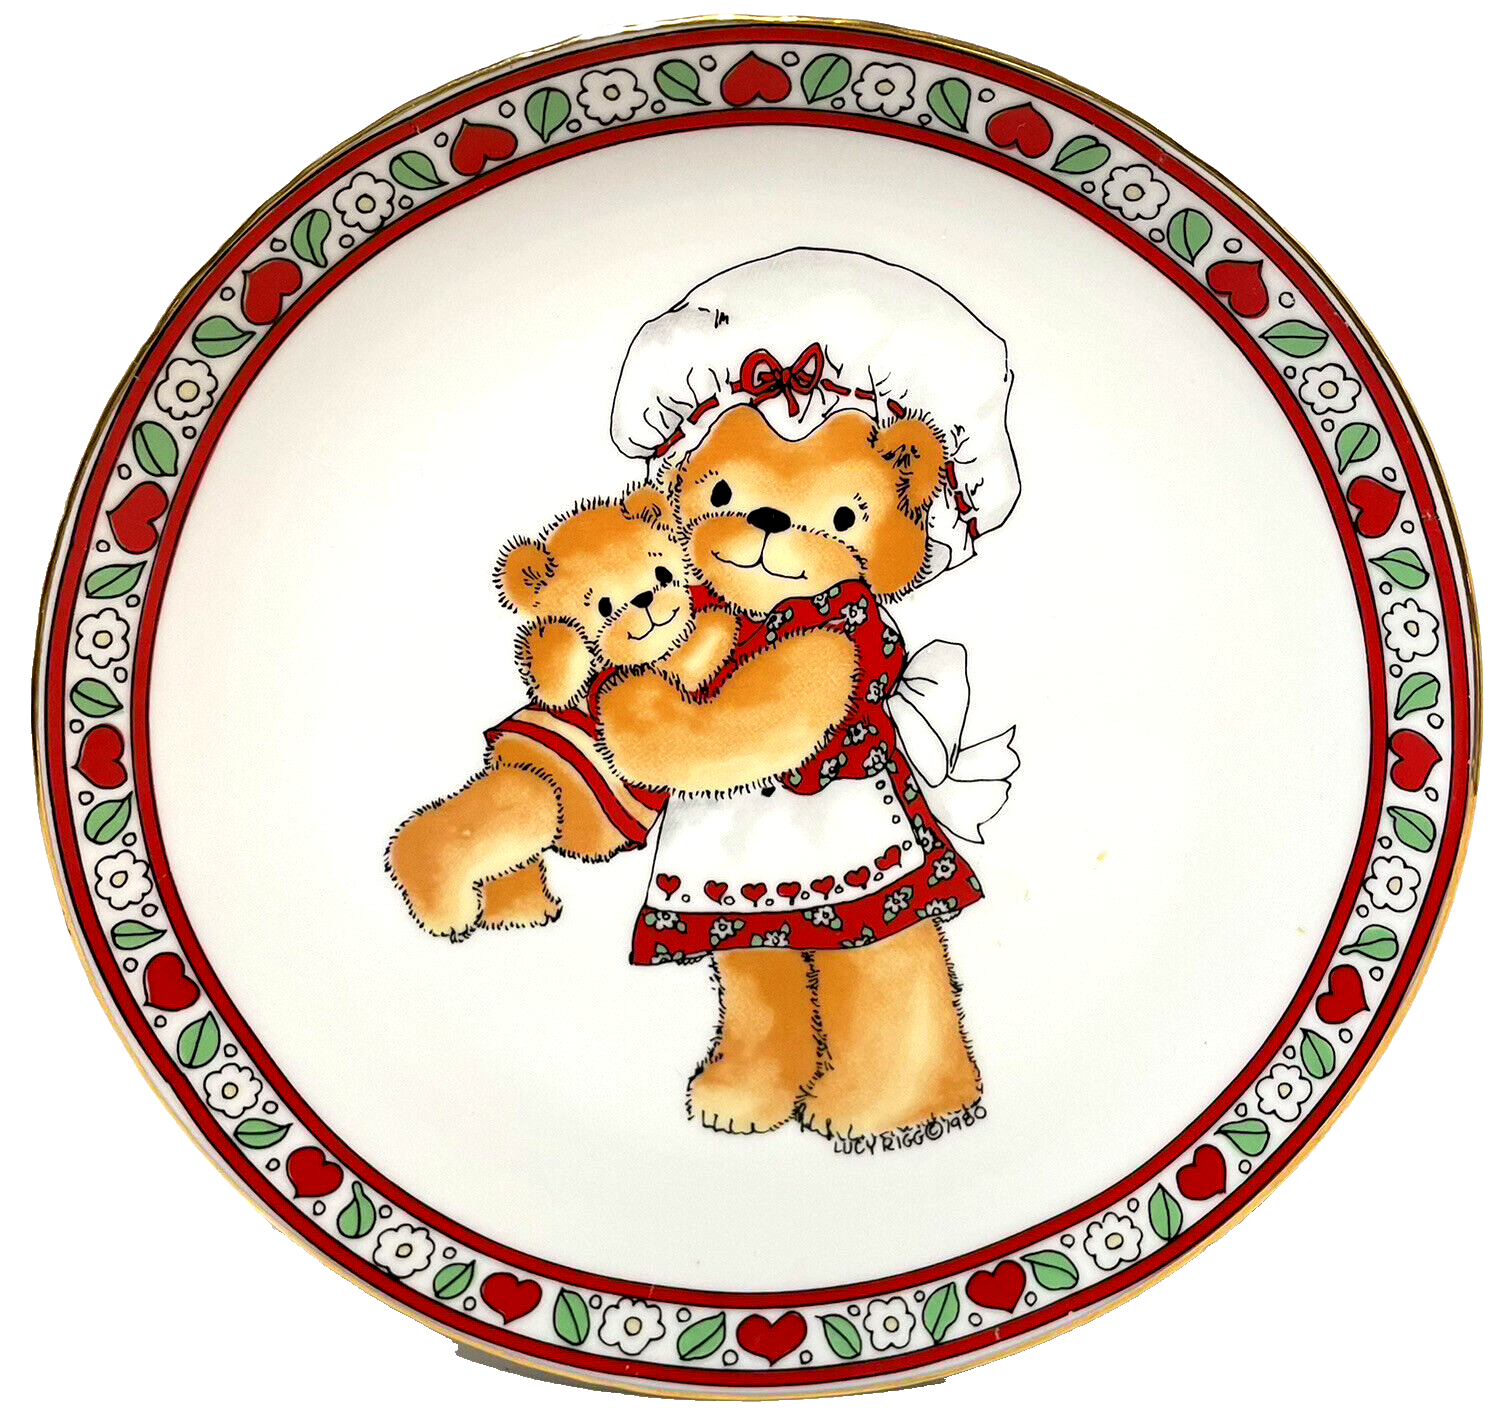 Vintage 1979 Enesco Lucy Rigg Porcelain Plate Lucy and Me Teddy Bears 7 in - $16.56